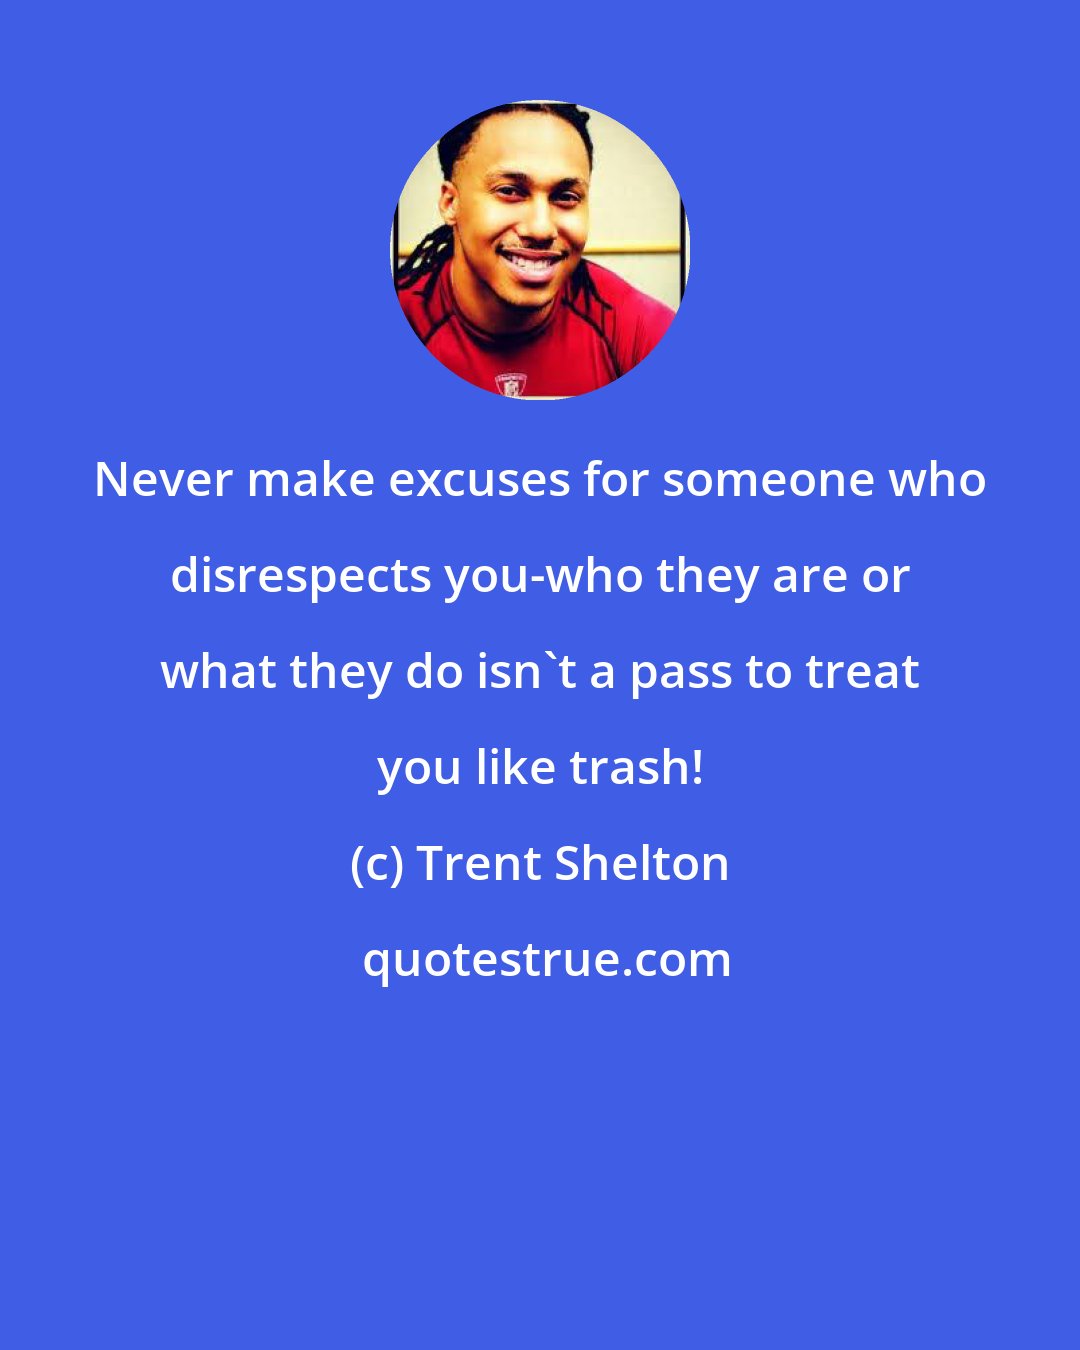 Trent Shelton: Never make excuses for someone who disrespects you-who they are or what they do isn't a pass to treat you like trash!